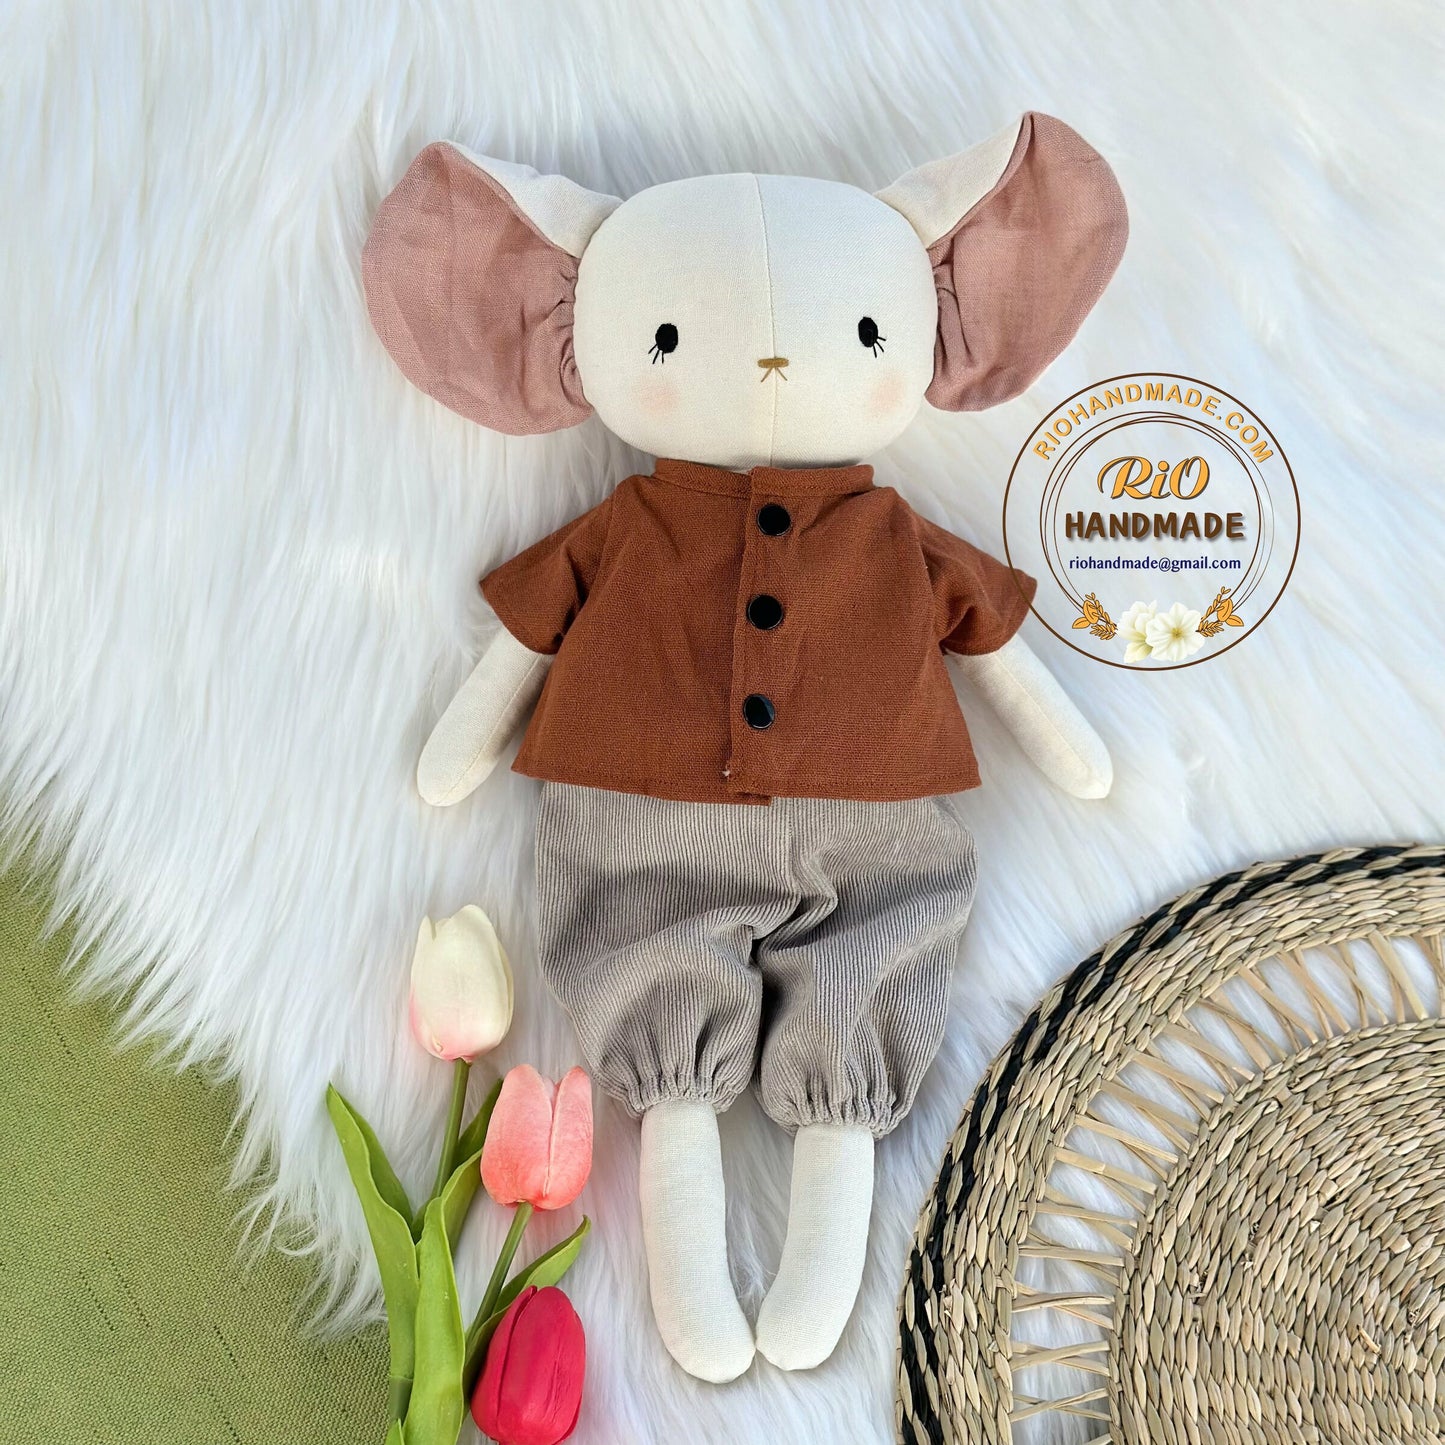 Ready To Ship, Rio Handmade Linen Mouse Toy, Nursery Decor Stuffed, Linen Baby Toy, Stuffed Mouse Toy For Toddler, Kid, Adult Hobby